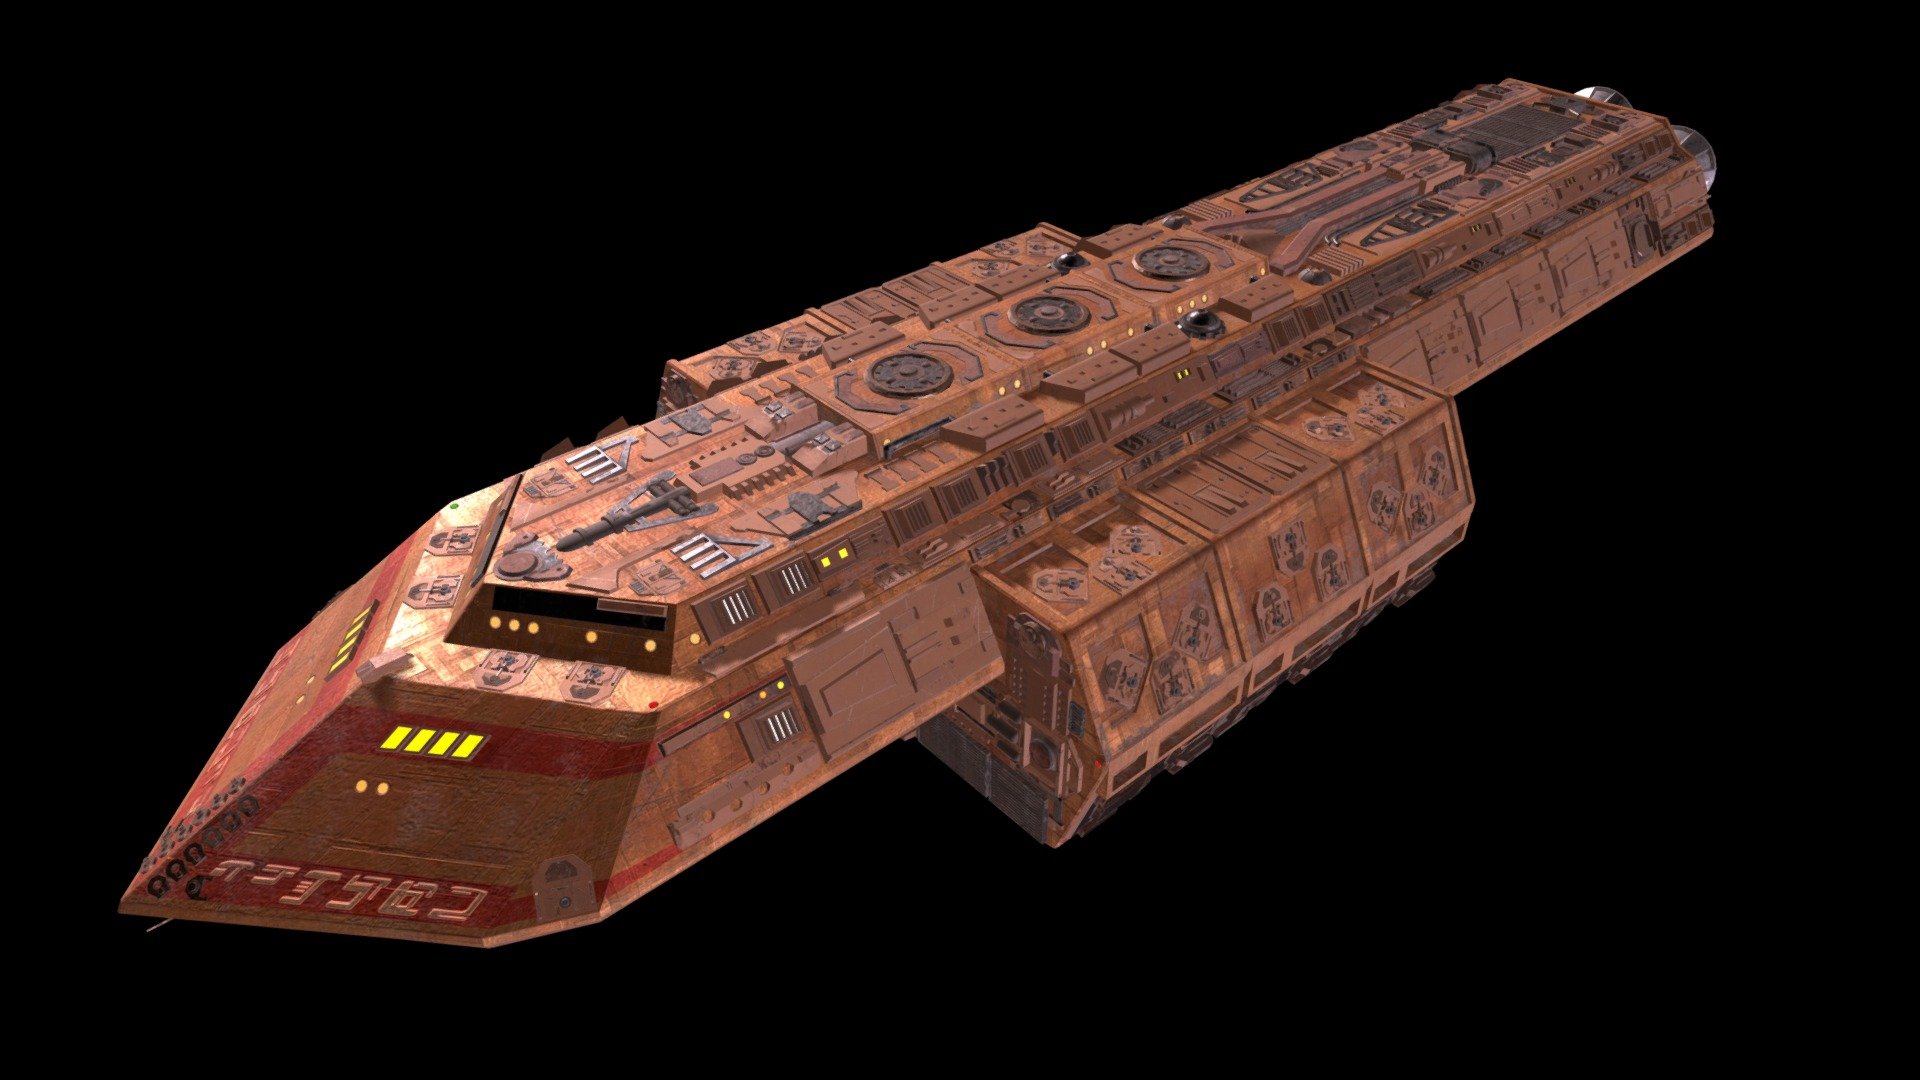 My 3D model of the Batris, a Talarian freighter/cargo ship. This ship design premiered in Star Trek: The Next Generation. Original design built by Greg Jein.

You can purchase it here: https://ko-fi.com/s/e7a518c4cb - Batris Talarian Freighter (Star Trek: TNG) - 3D model by Pundus Art (@Pundus_Art) 3d model